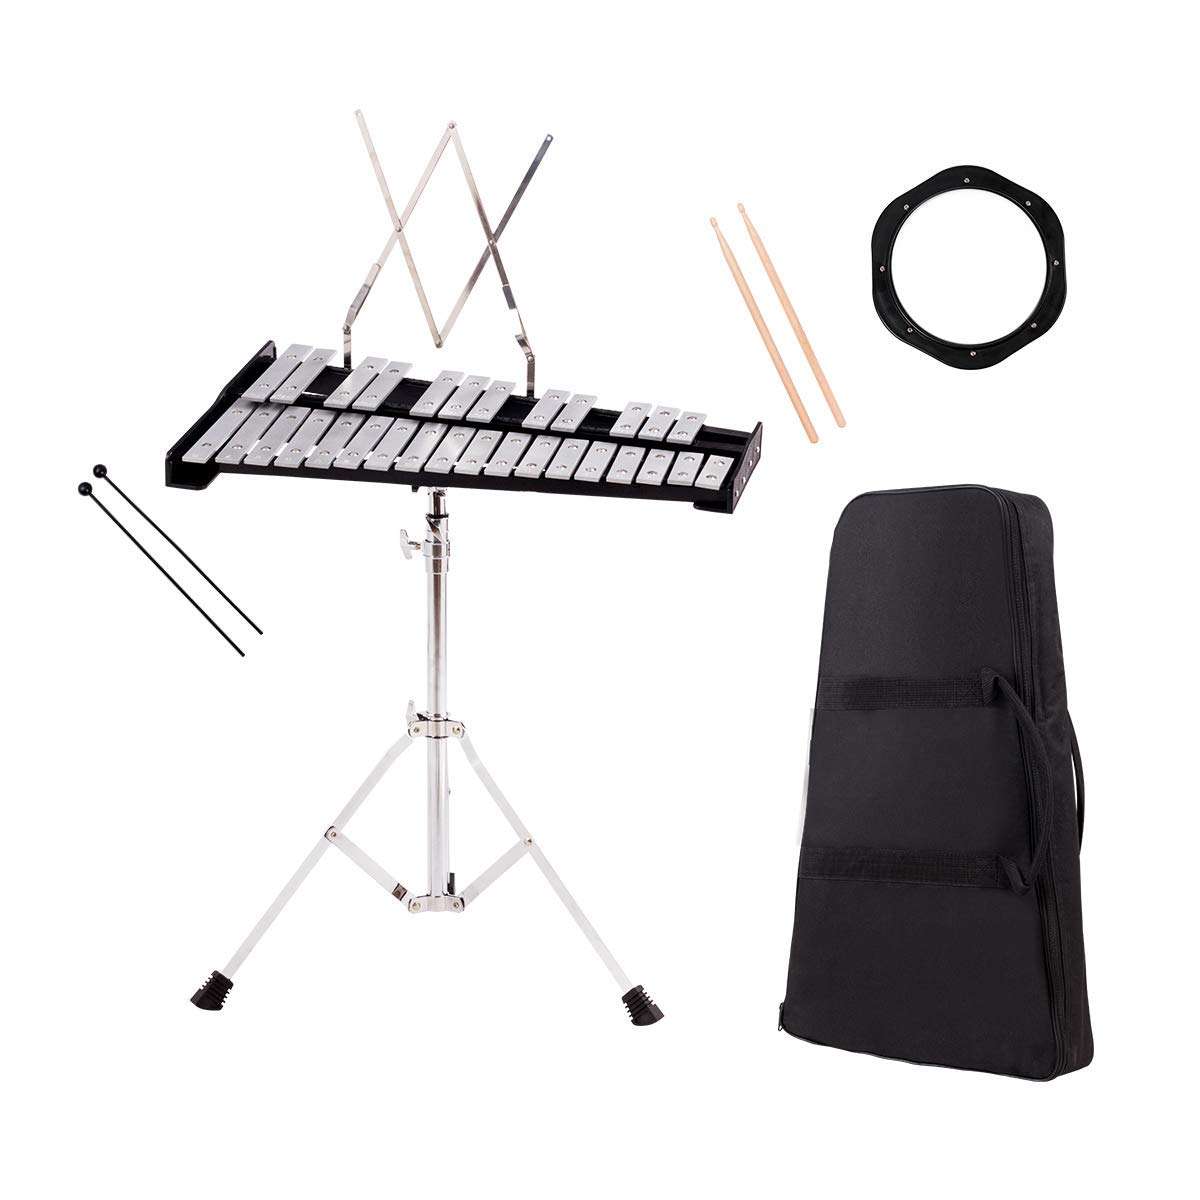 Orchestra Bells - Percussion - Musical Instruments - Products